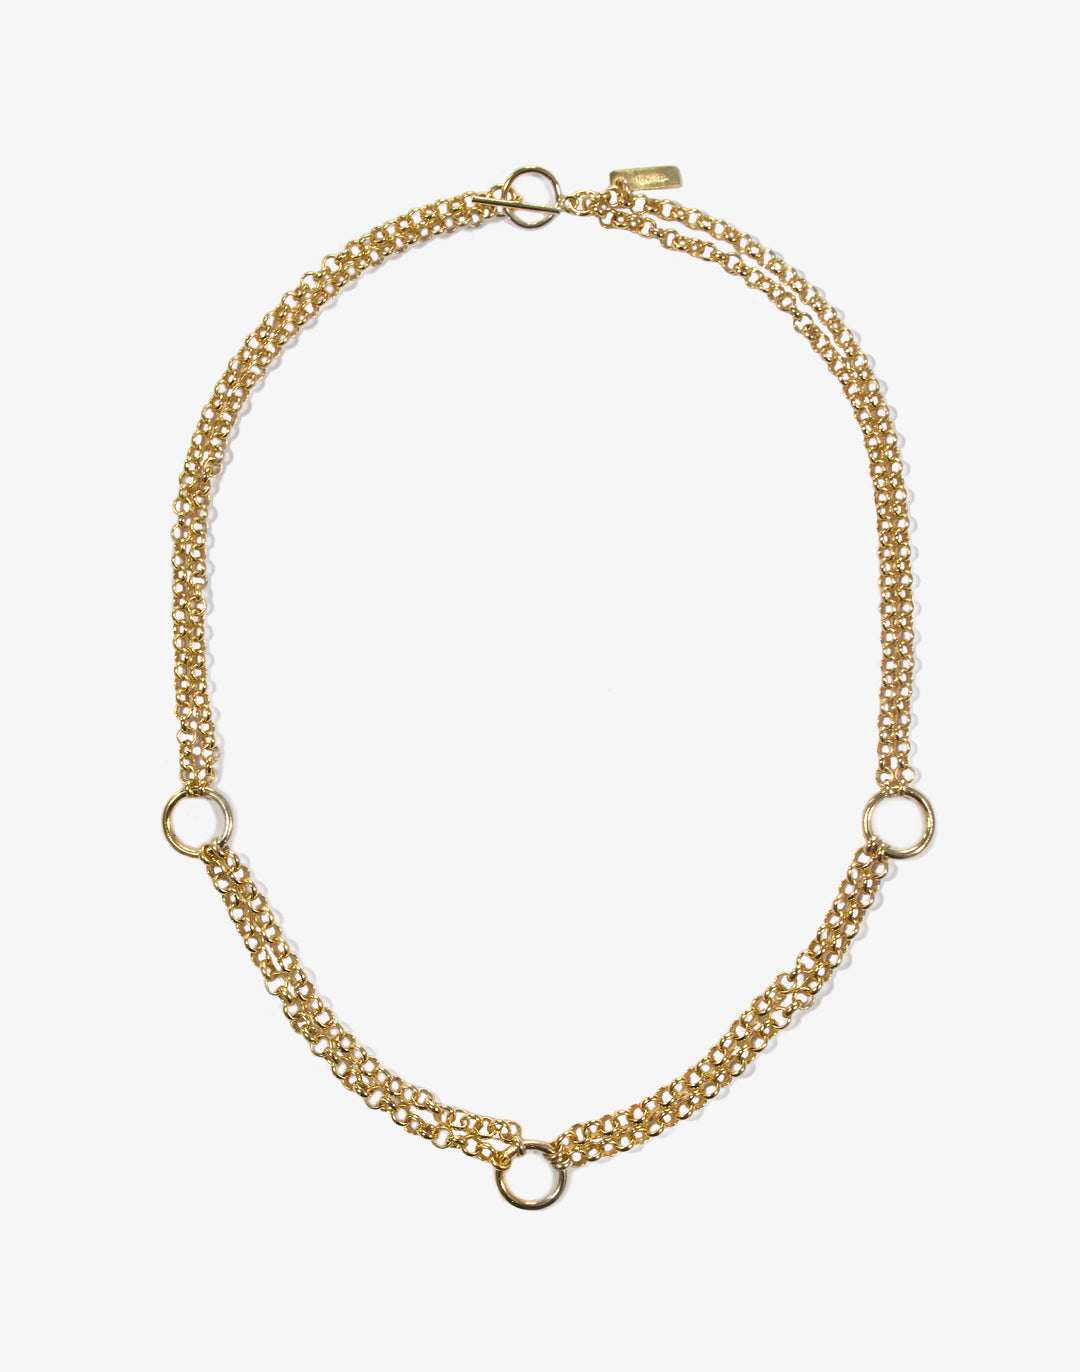 llayers Gold women minimal long chain choker necklace with rings Hancrafted in Brooklyn New York